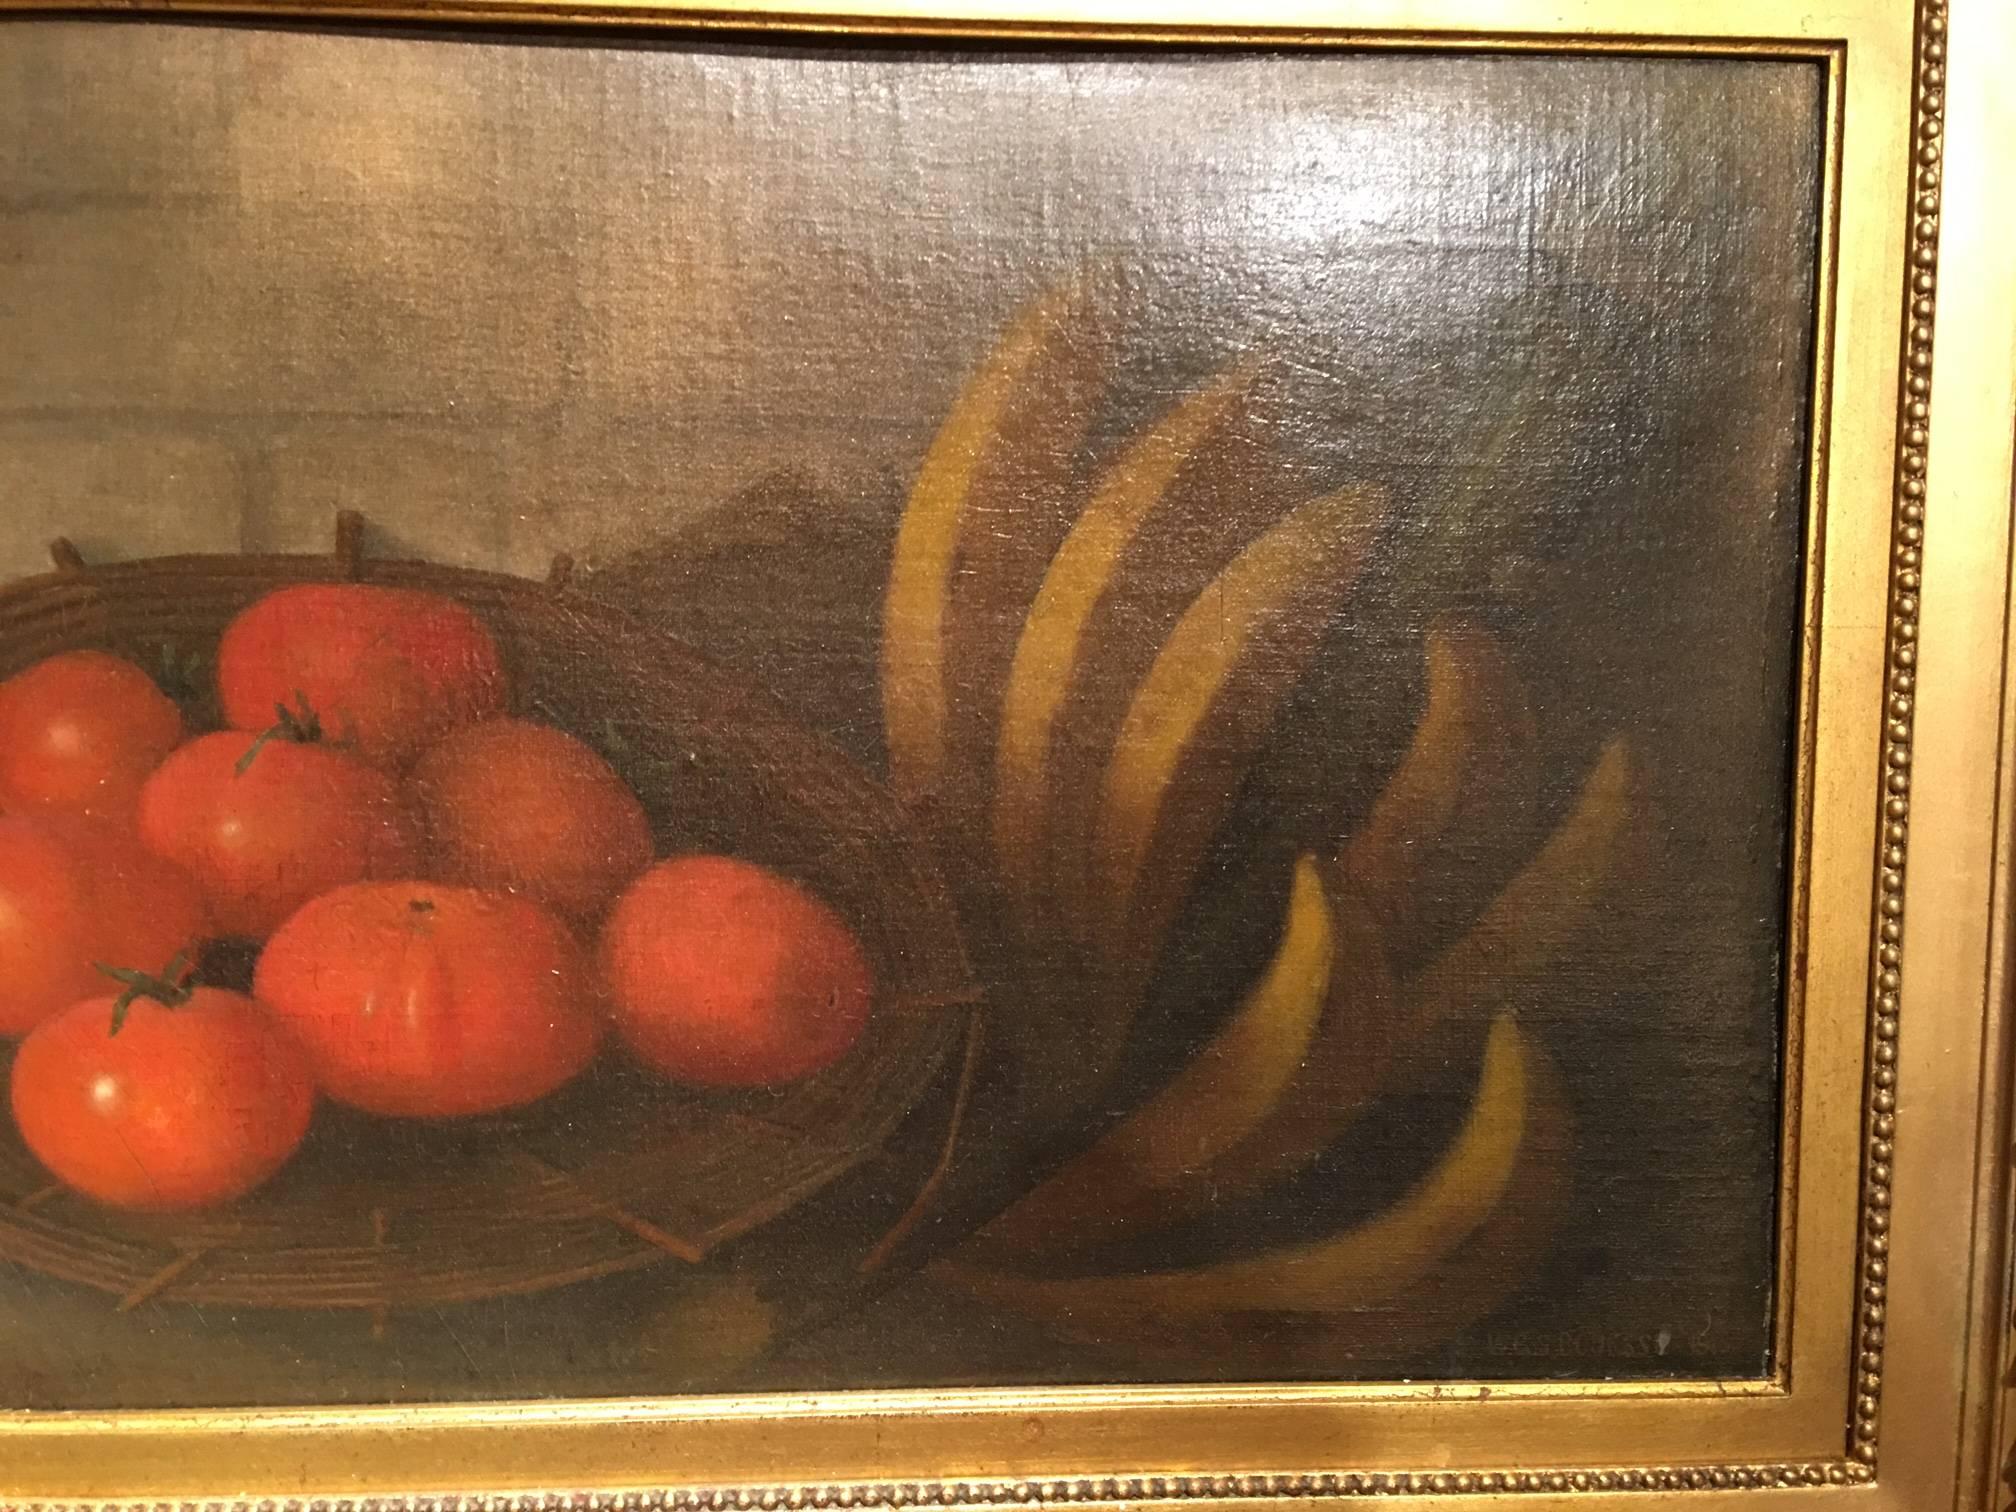 20th Century Framed Oil on Canvas, Still Life with Tomatoes, Signed W.G.S. Boursse